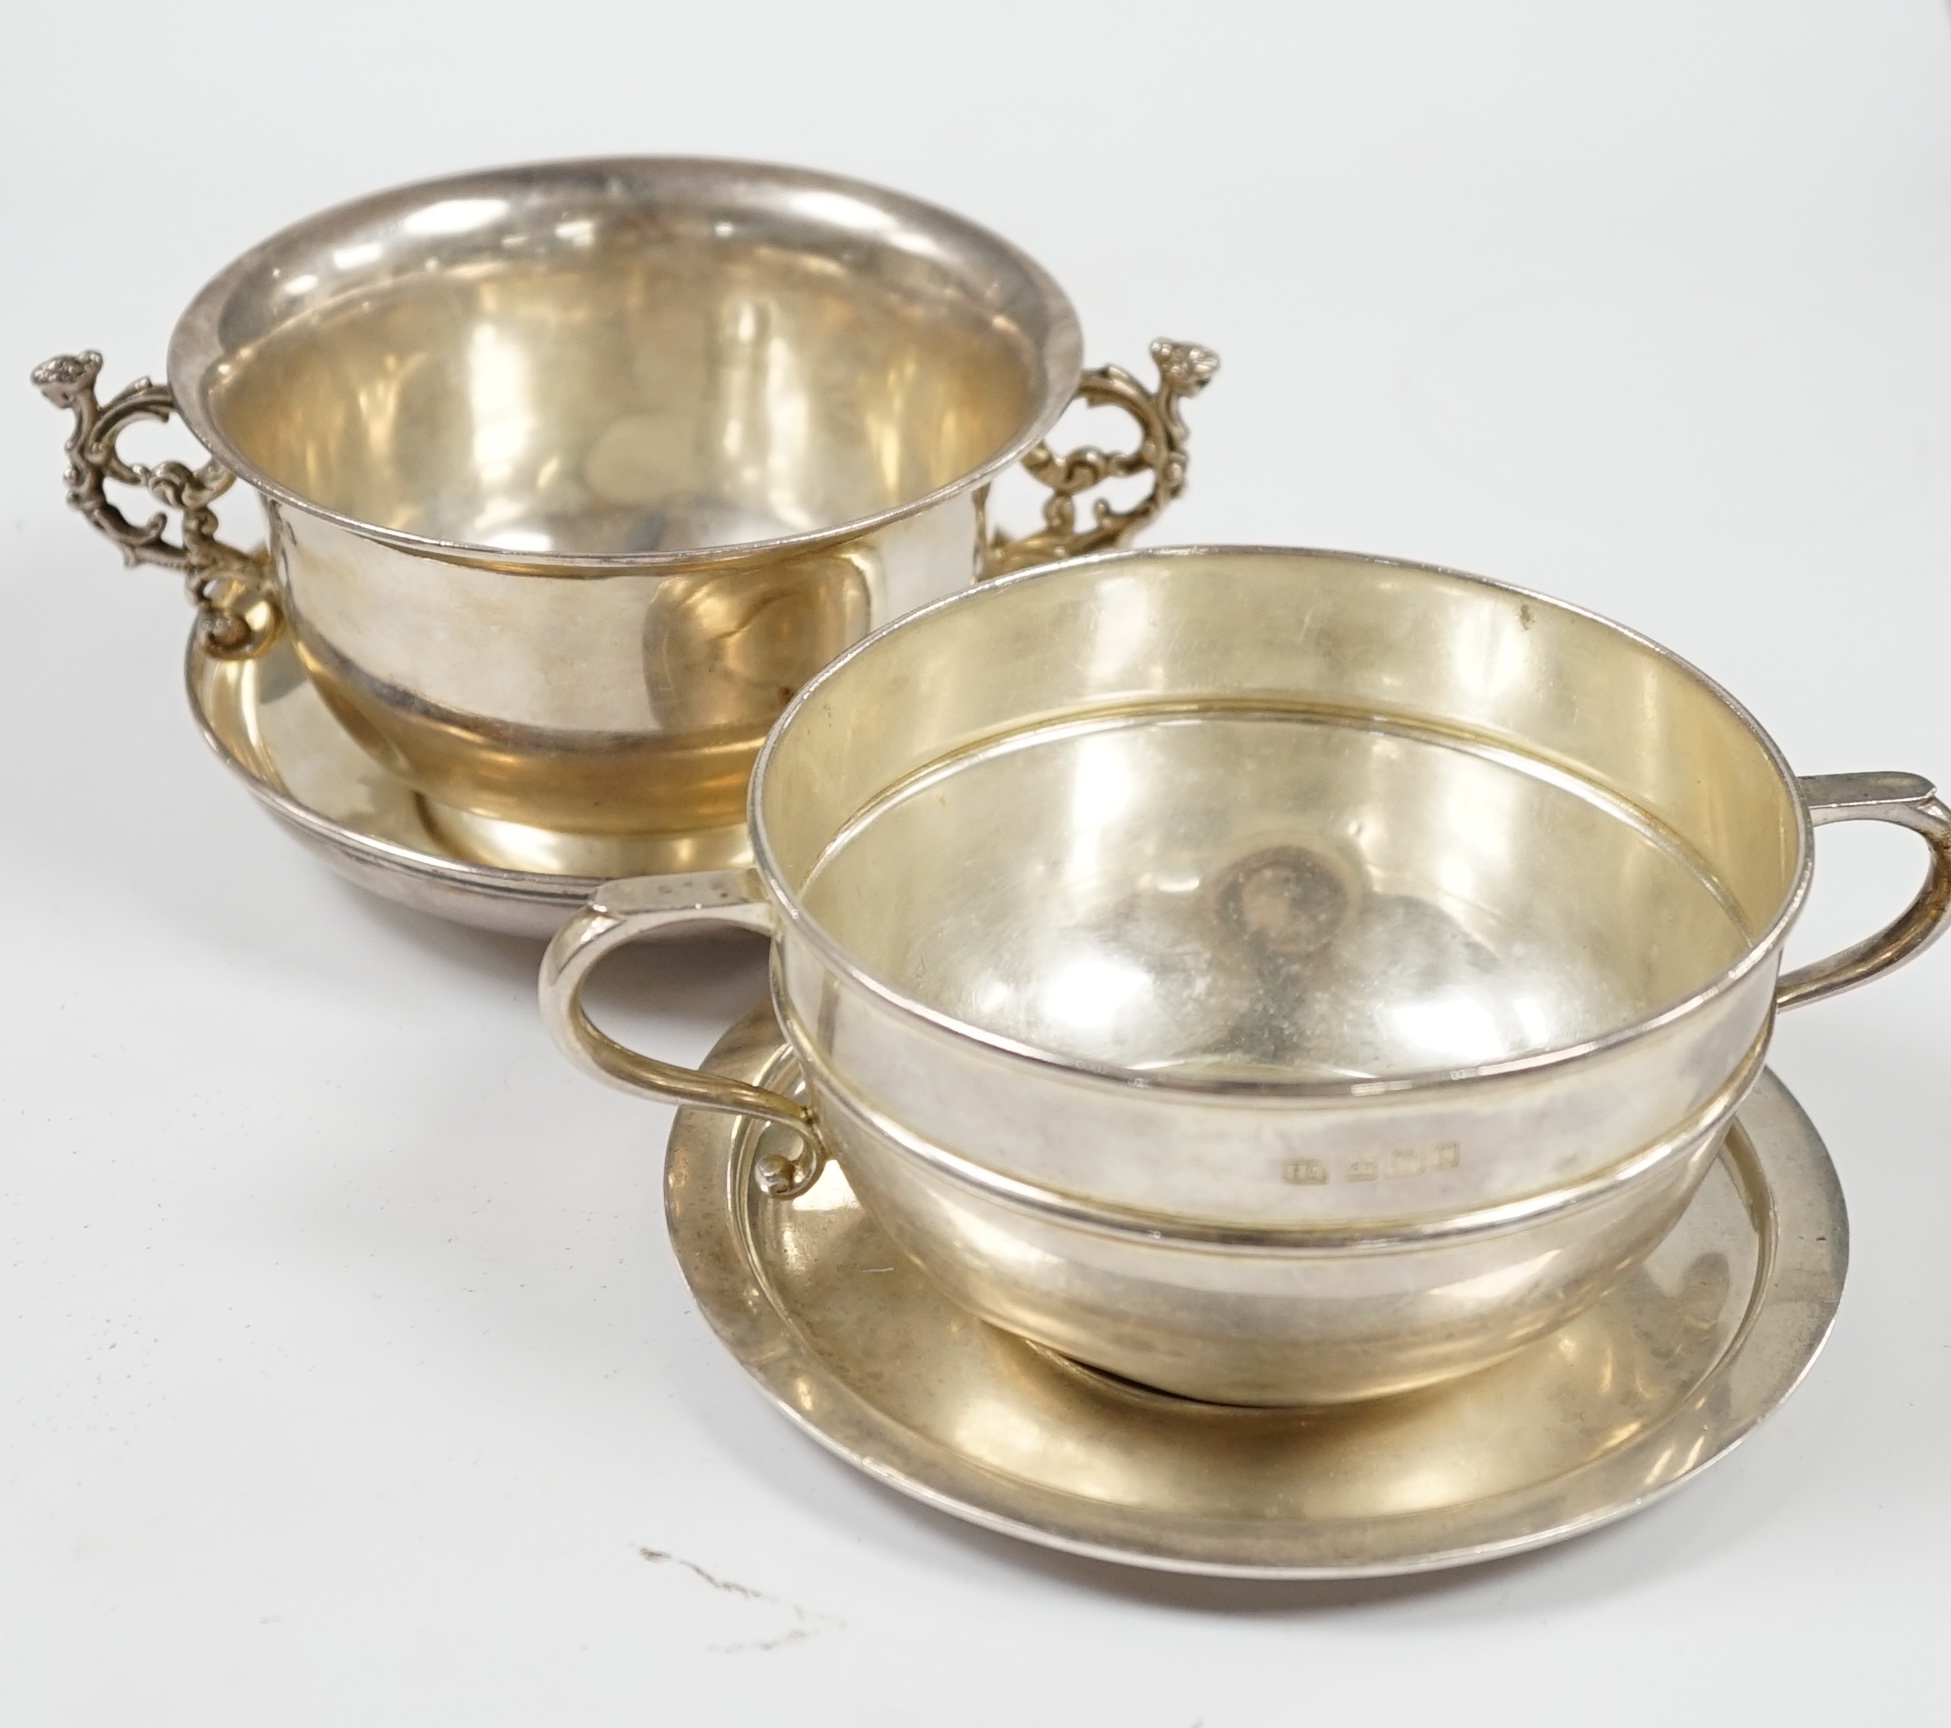 An Edwardian silver porringer on stand, Sheffield, 1901 and a late silver porringer on stand, 12.9oz. Condition - poor to fair